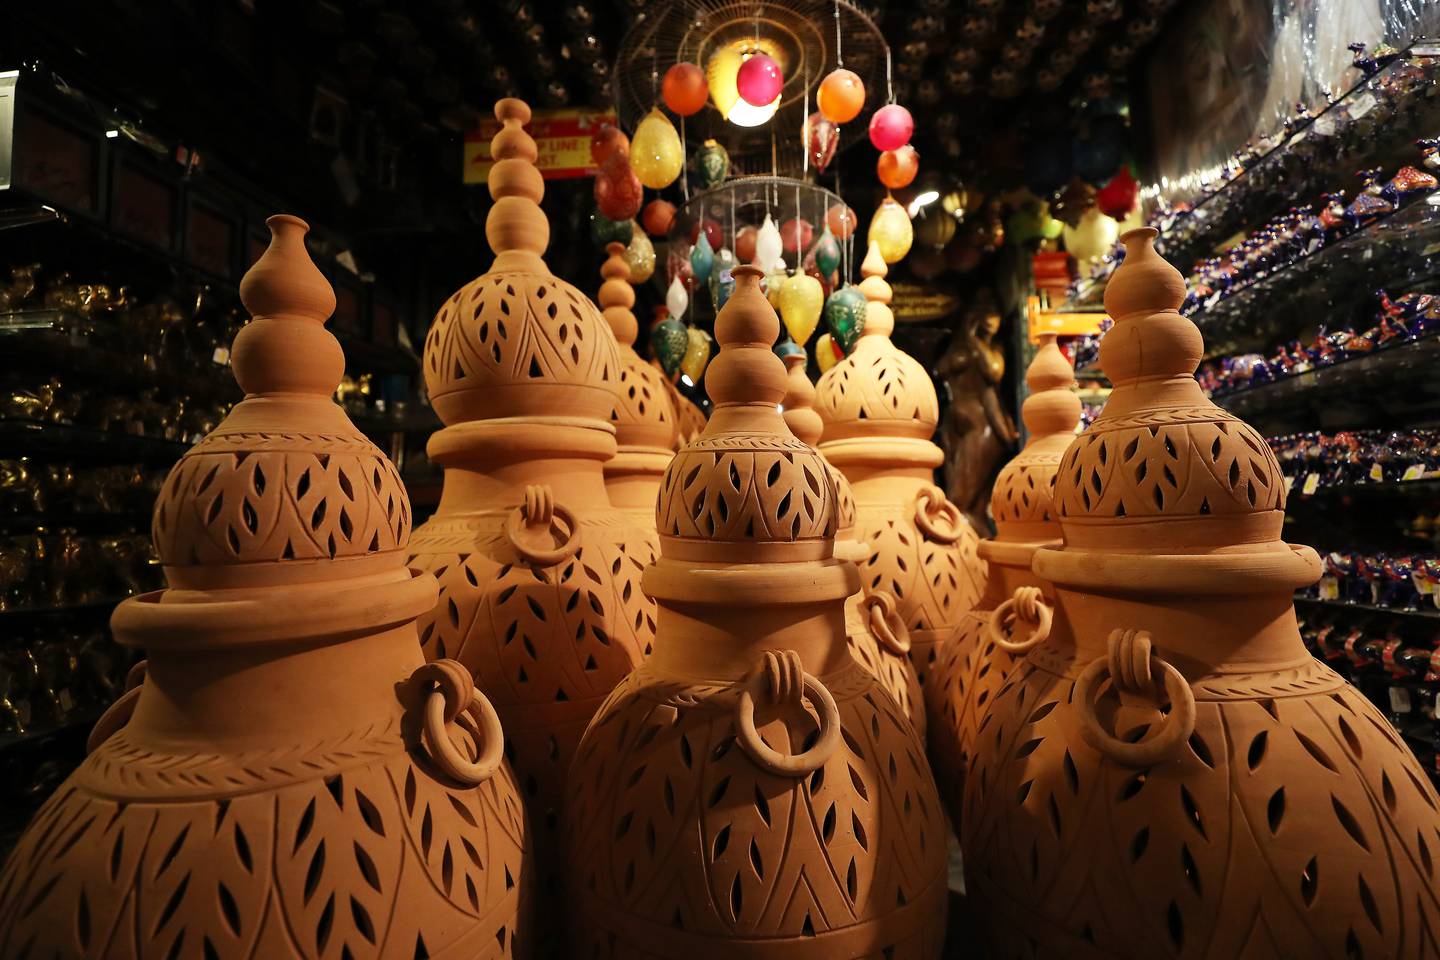 Clay pots made in Ras Al Khaimah, with prices starting from Dh50 and going up to Dh5,000. Pawan Singh / The National